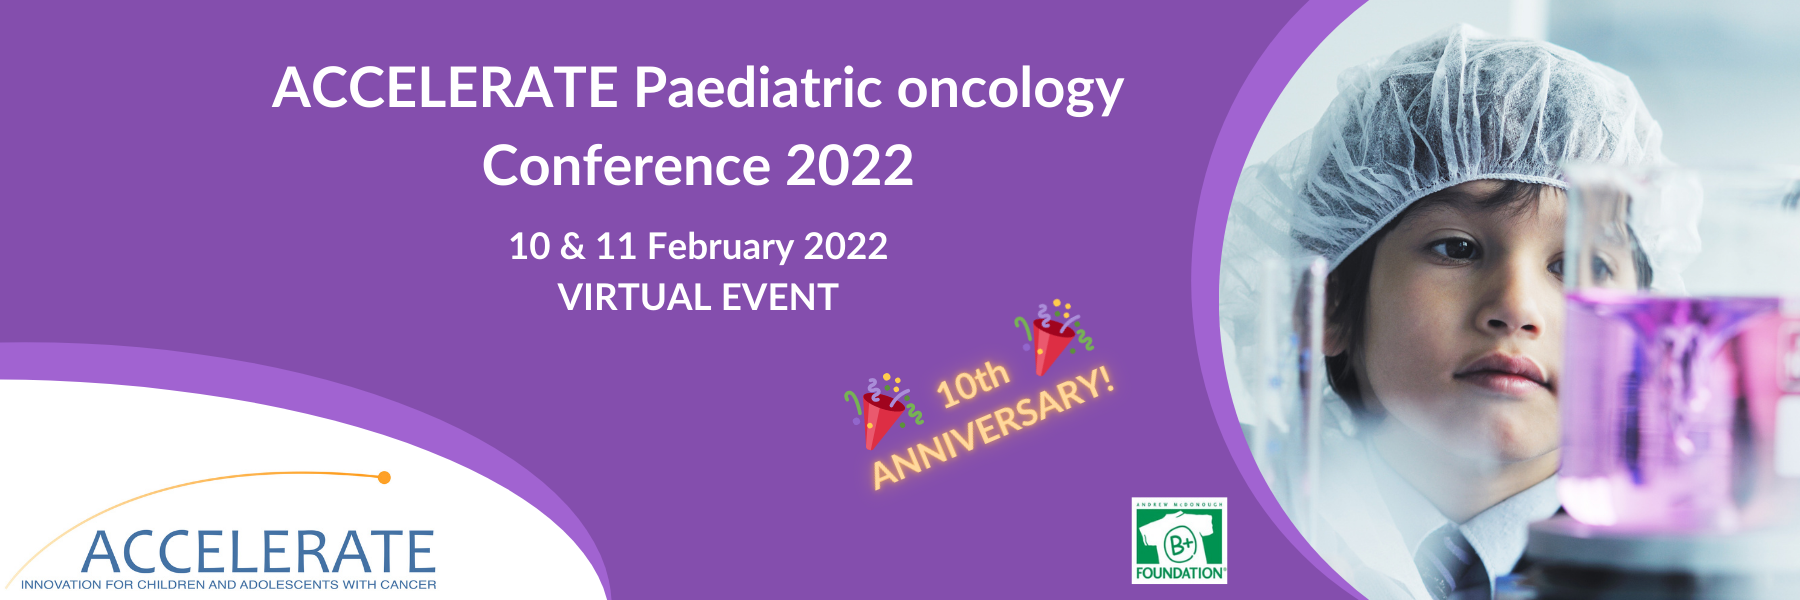 9th Paediatric Oncology Conference